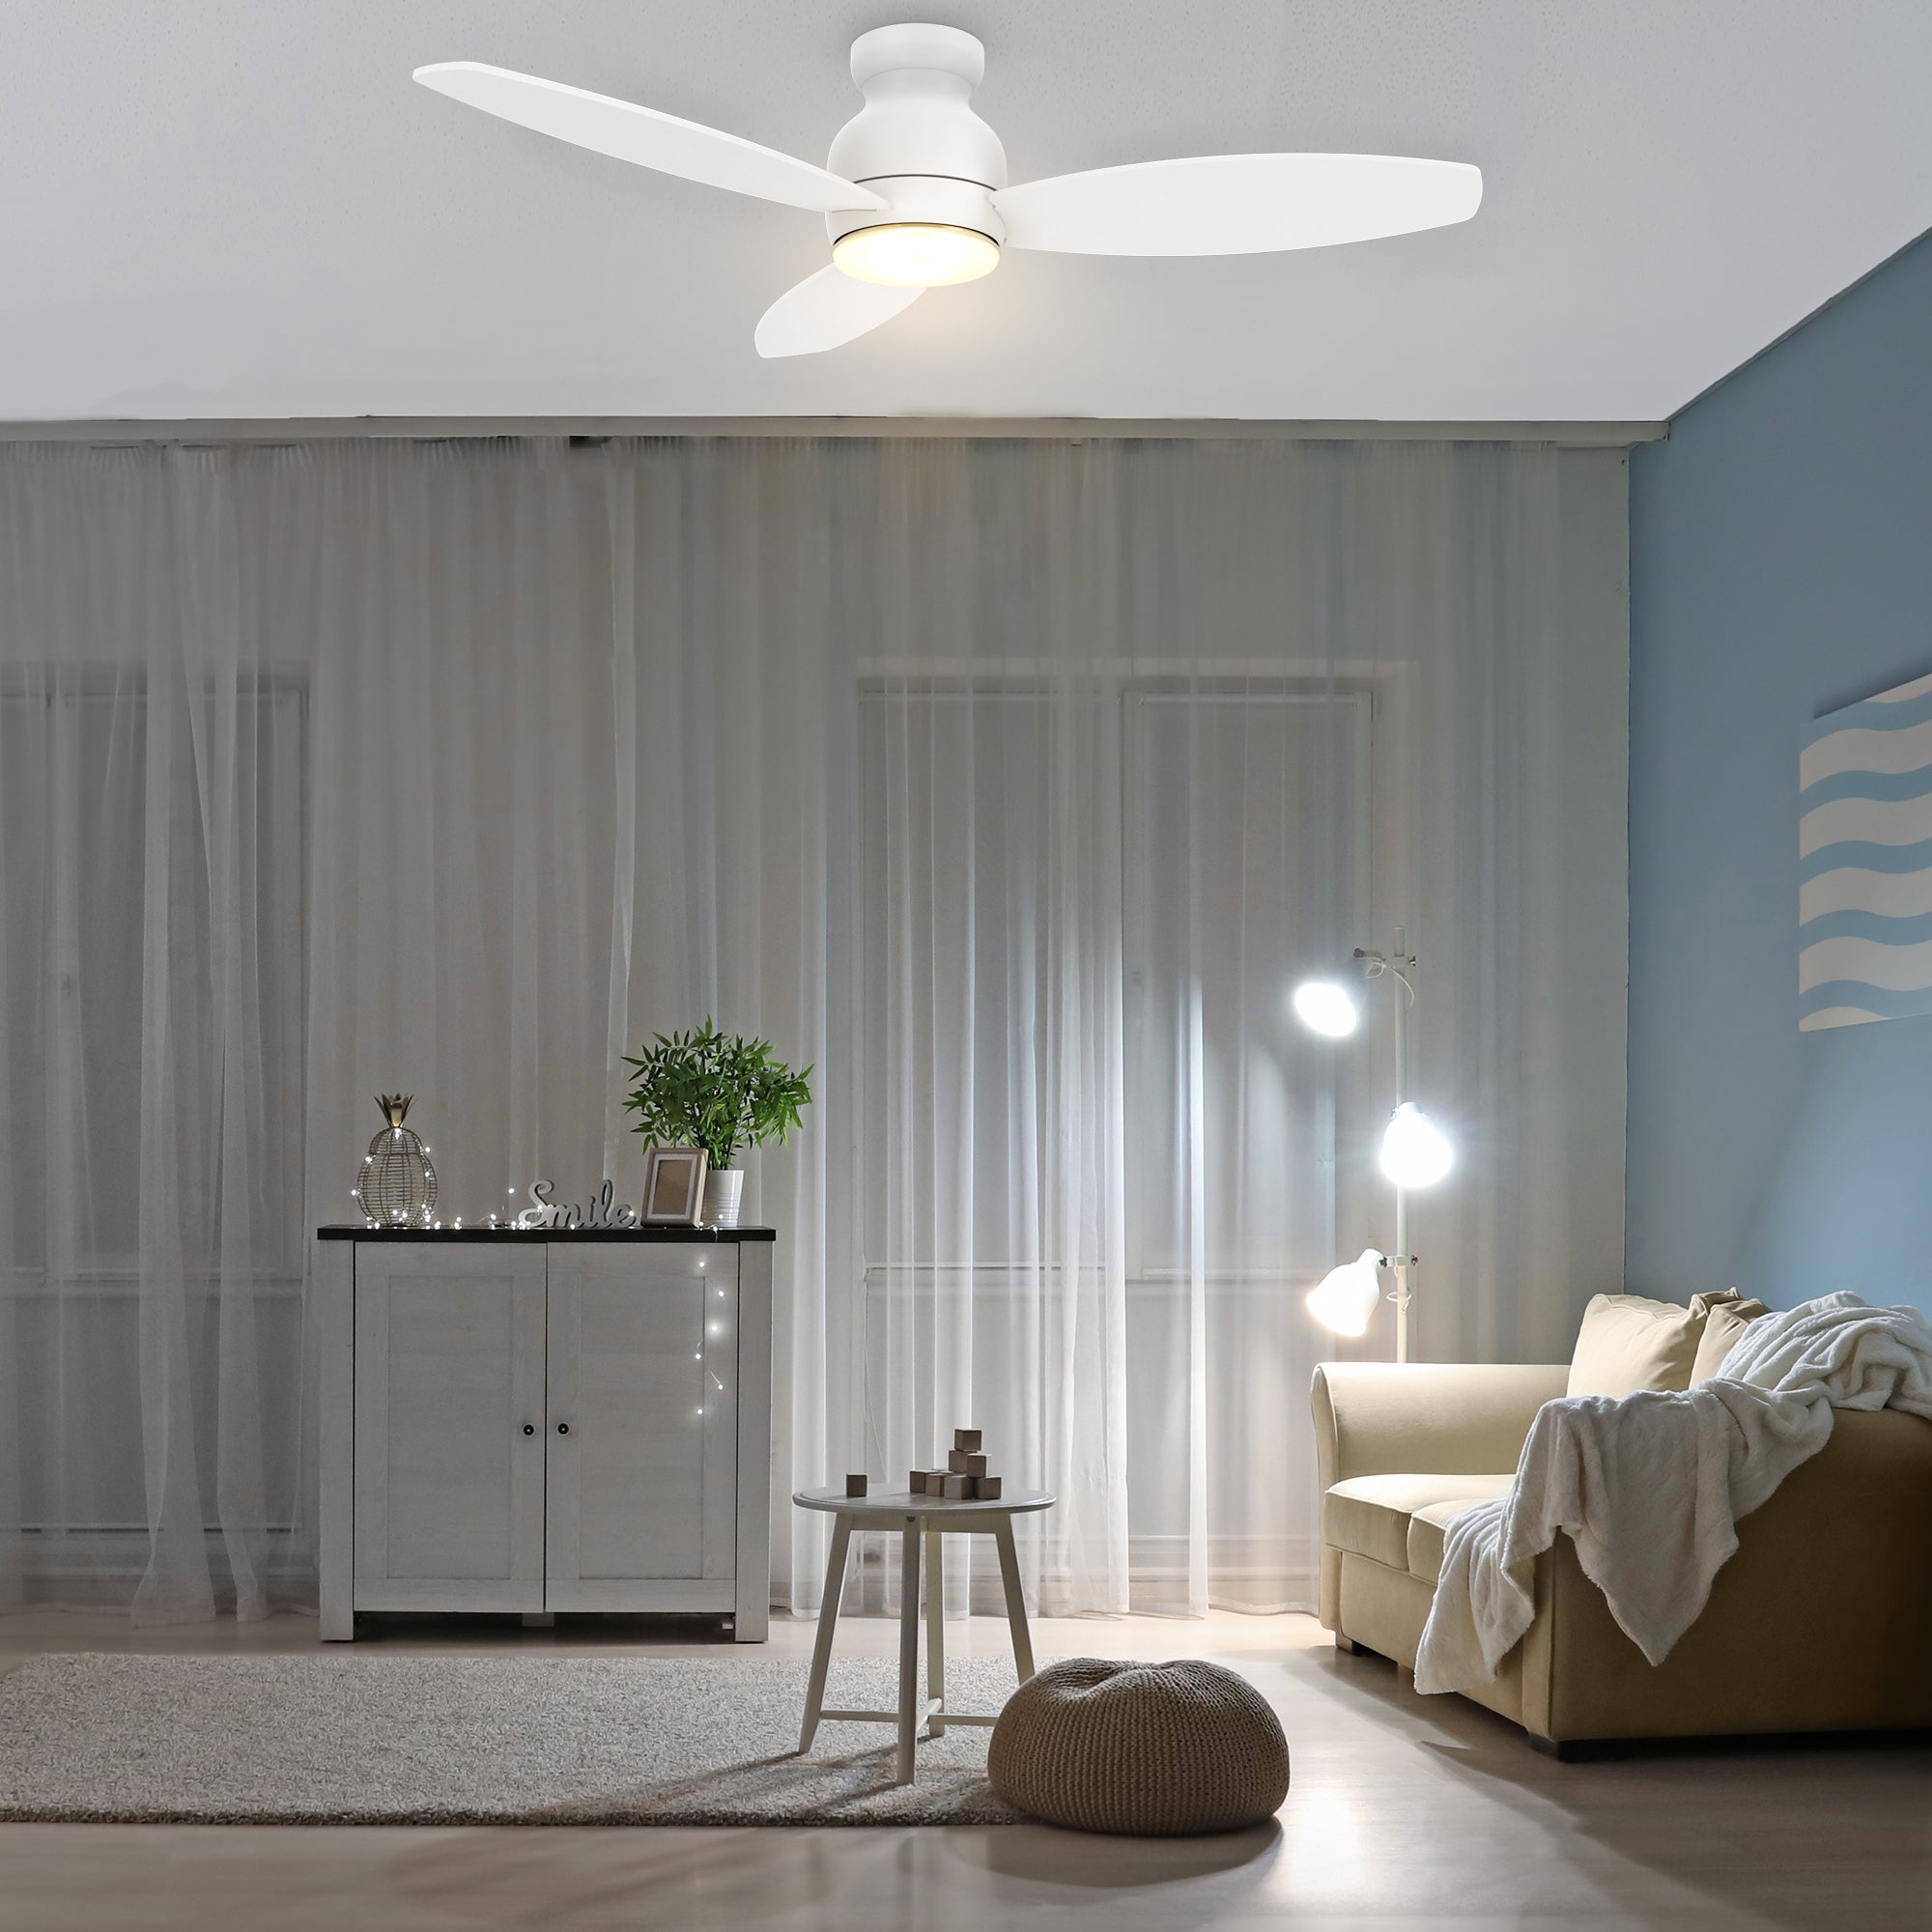 The Smafan 52&#39;&#39; Trendsetter smart ceiling fan keeps your space cool, bright, and stylish. It is a soft modern masterpiece perfect for your large indoor living spaces. This Wifi smart ceiling fan is a simplicity designing with Black finish, use elegant Plywood blades and has an integrated 4000K LED daylight. The fan features Remote control, Wi-Fi apps, Siri Shortcut and Voice control technology (compatible with Amazon Alexa and Google Home Assistant ) to set fan preferences.